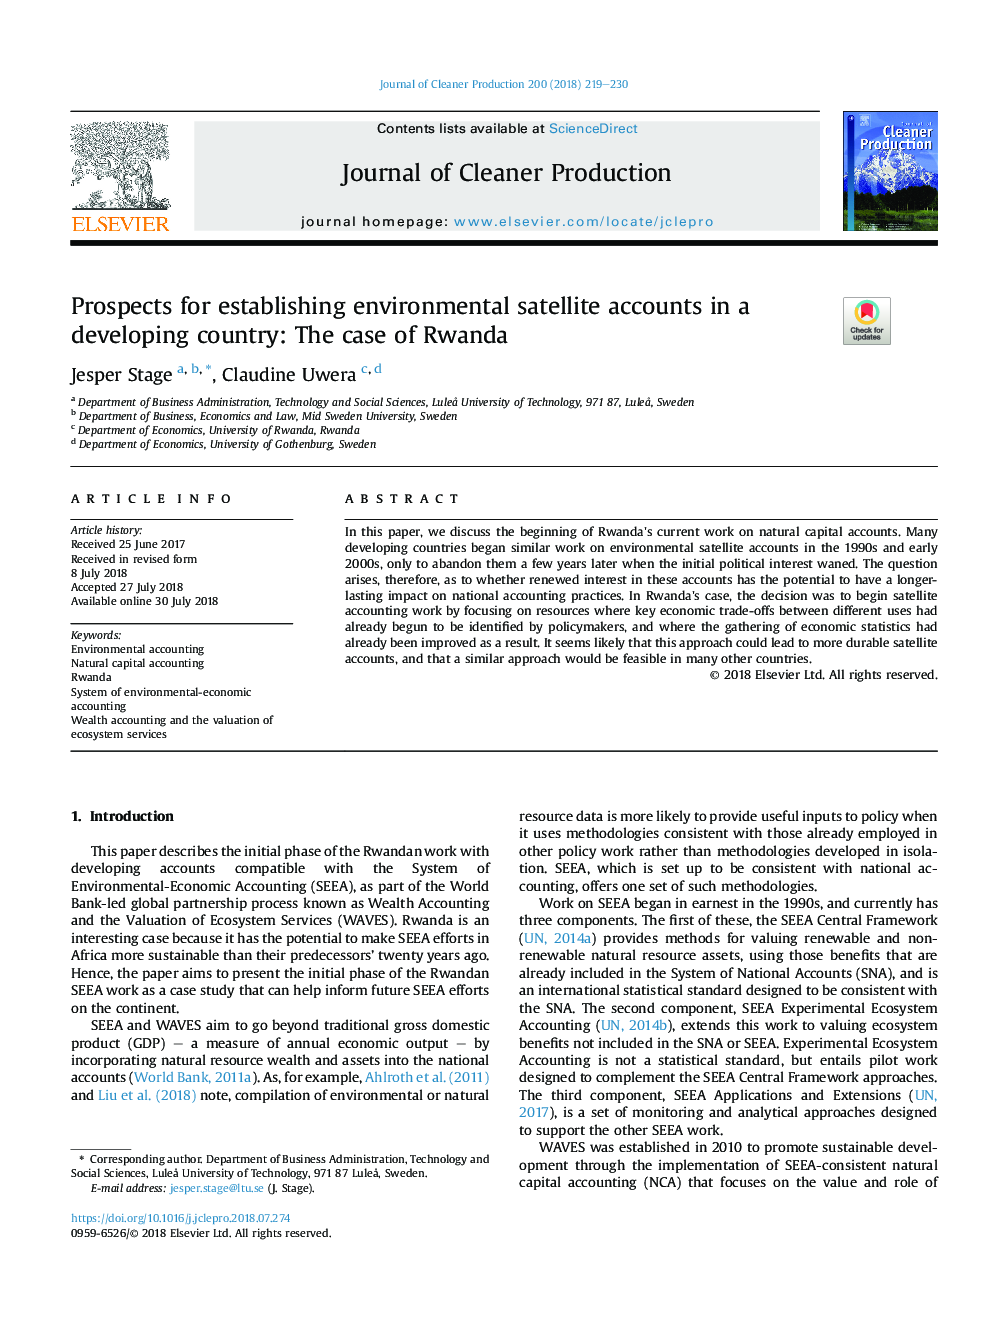 Prospects for establishing environmental satellite accounts in a developing country: The case of Rwanda